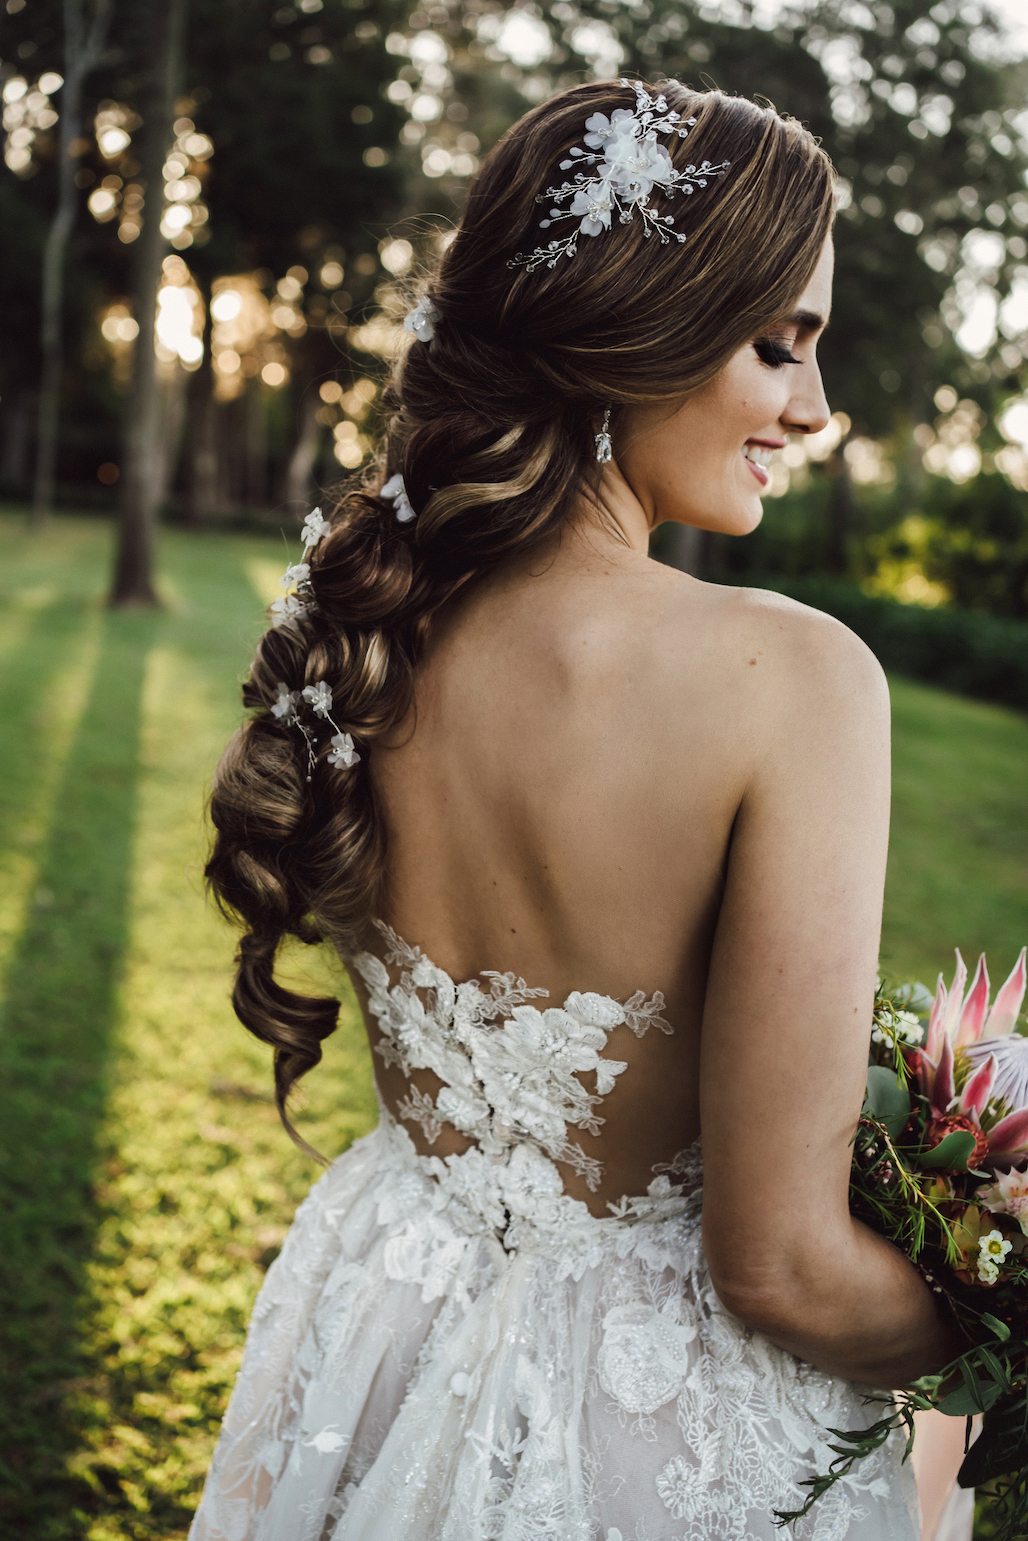 How to Wear Your Hair Based on Your Wedding Dress Silhouette and Style